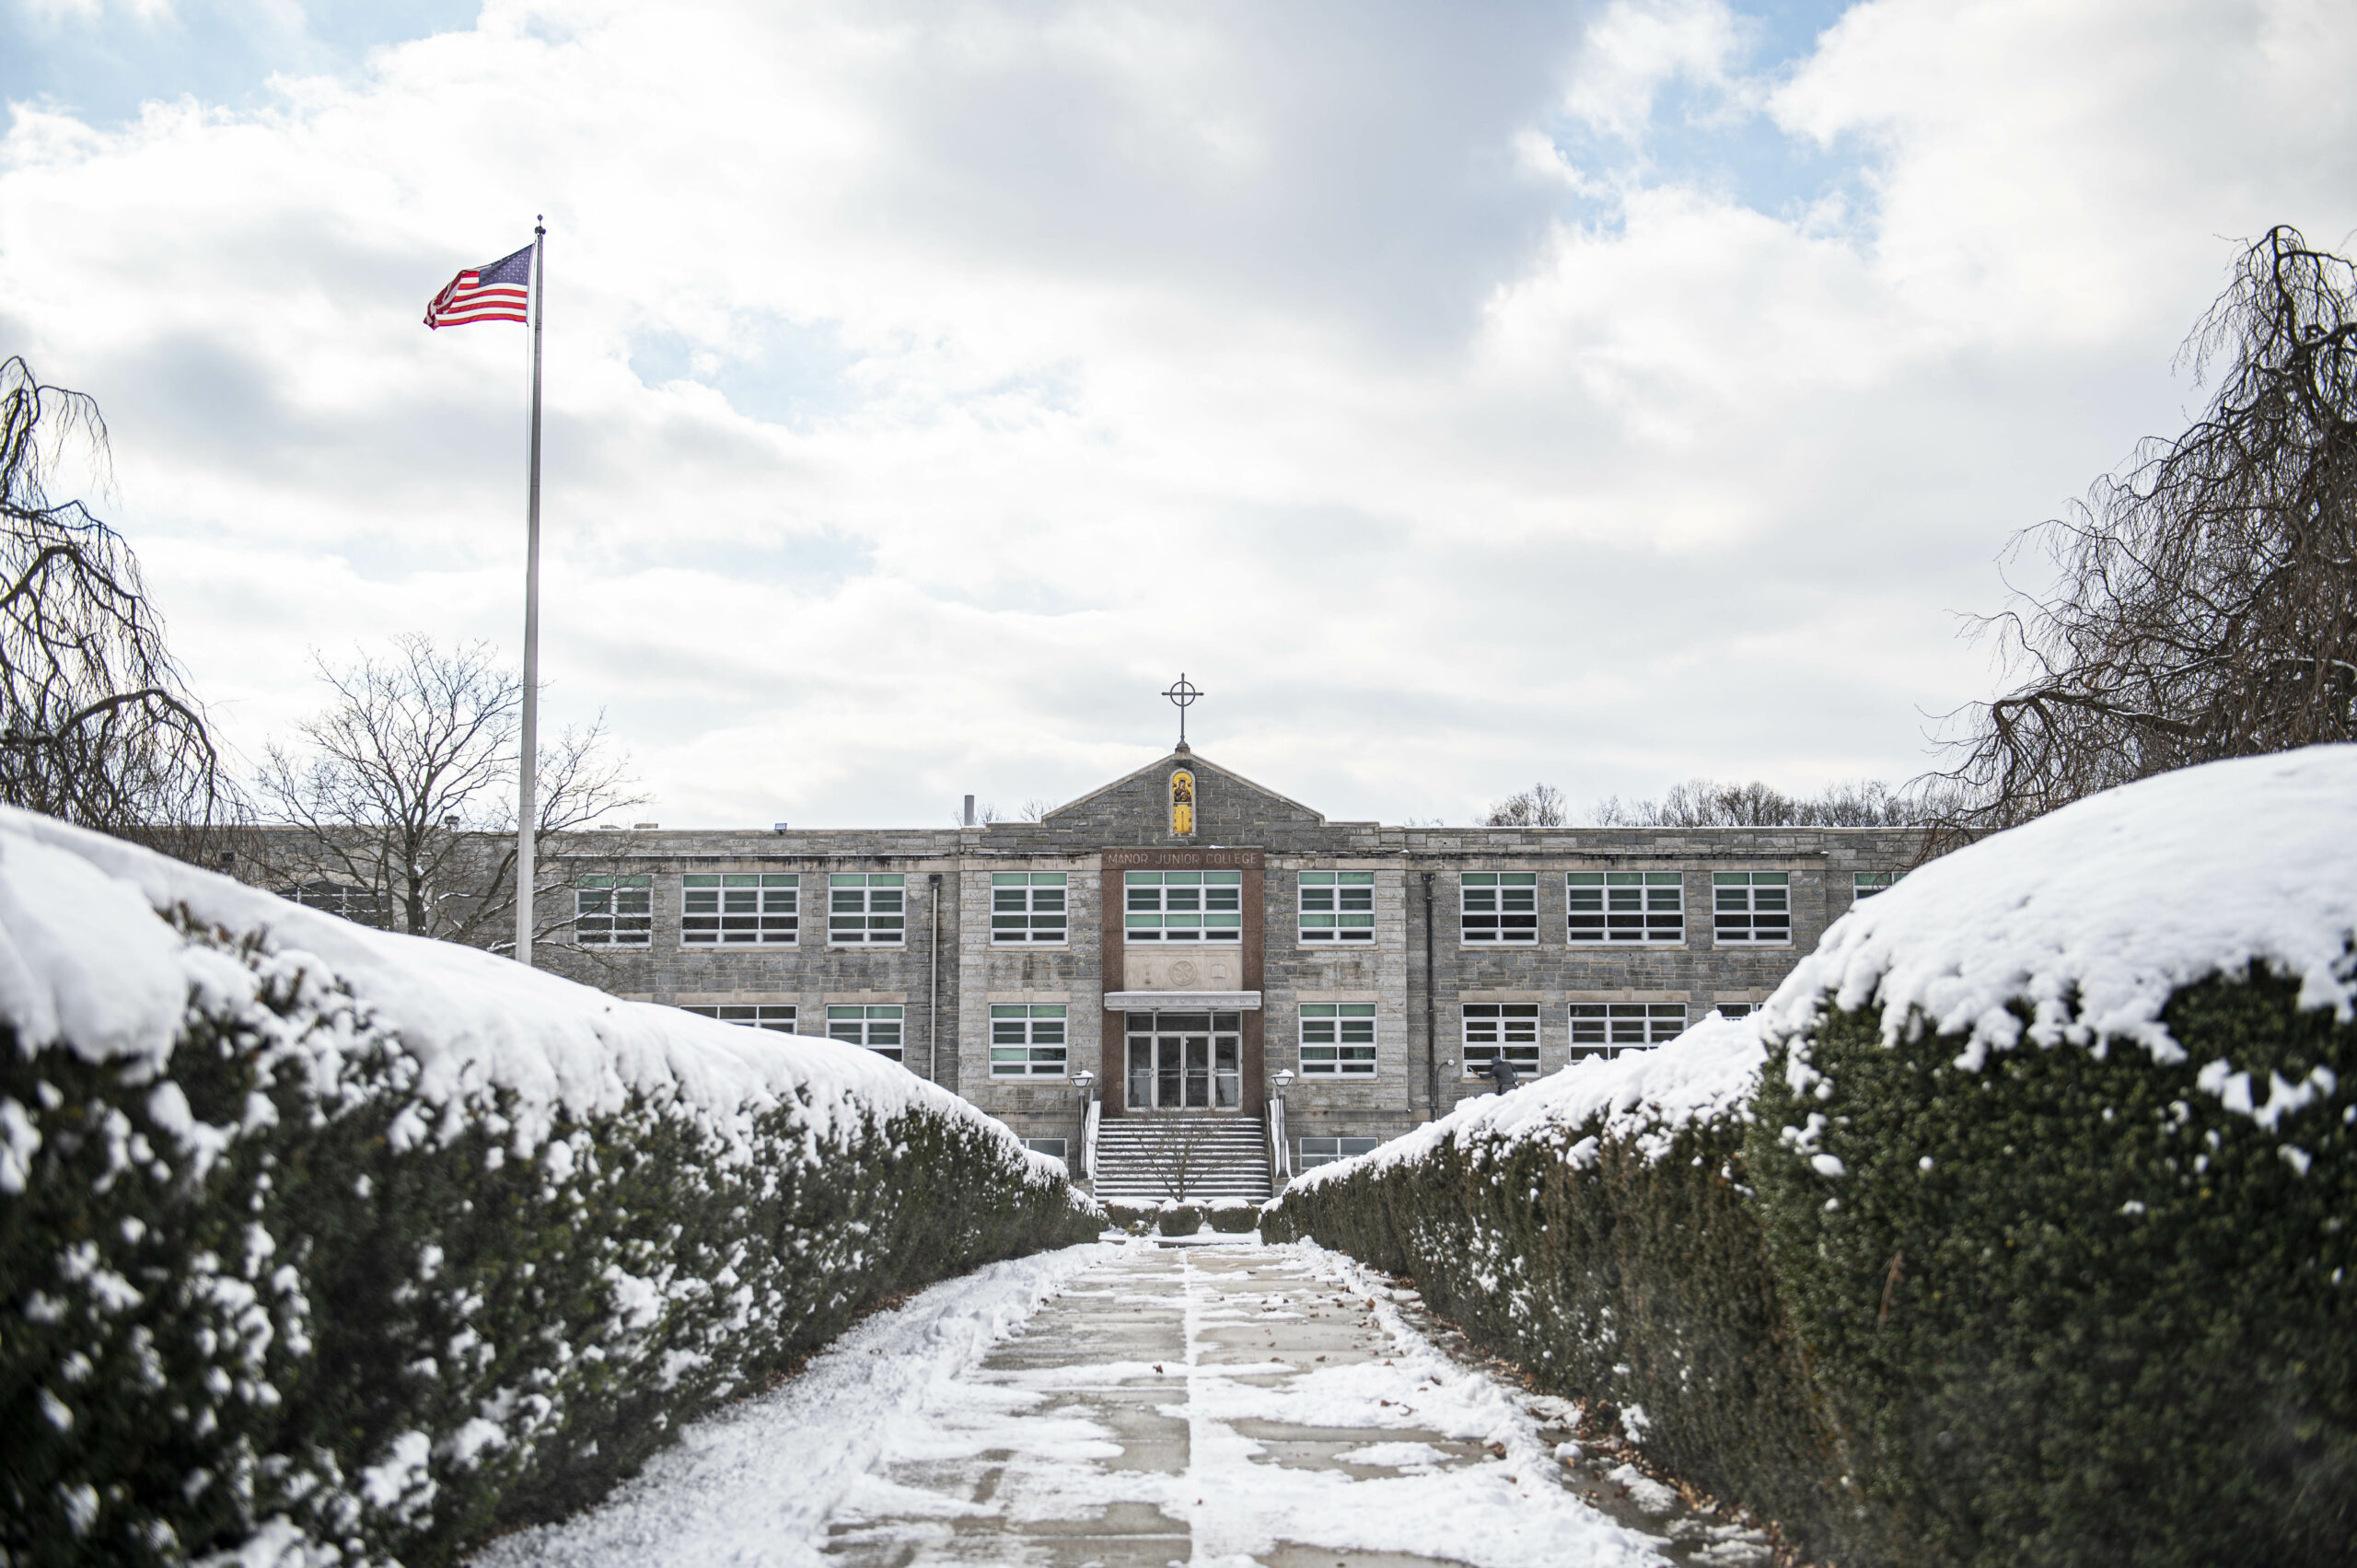 Snowy Manor campus with American flag